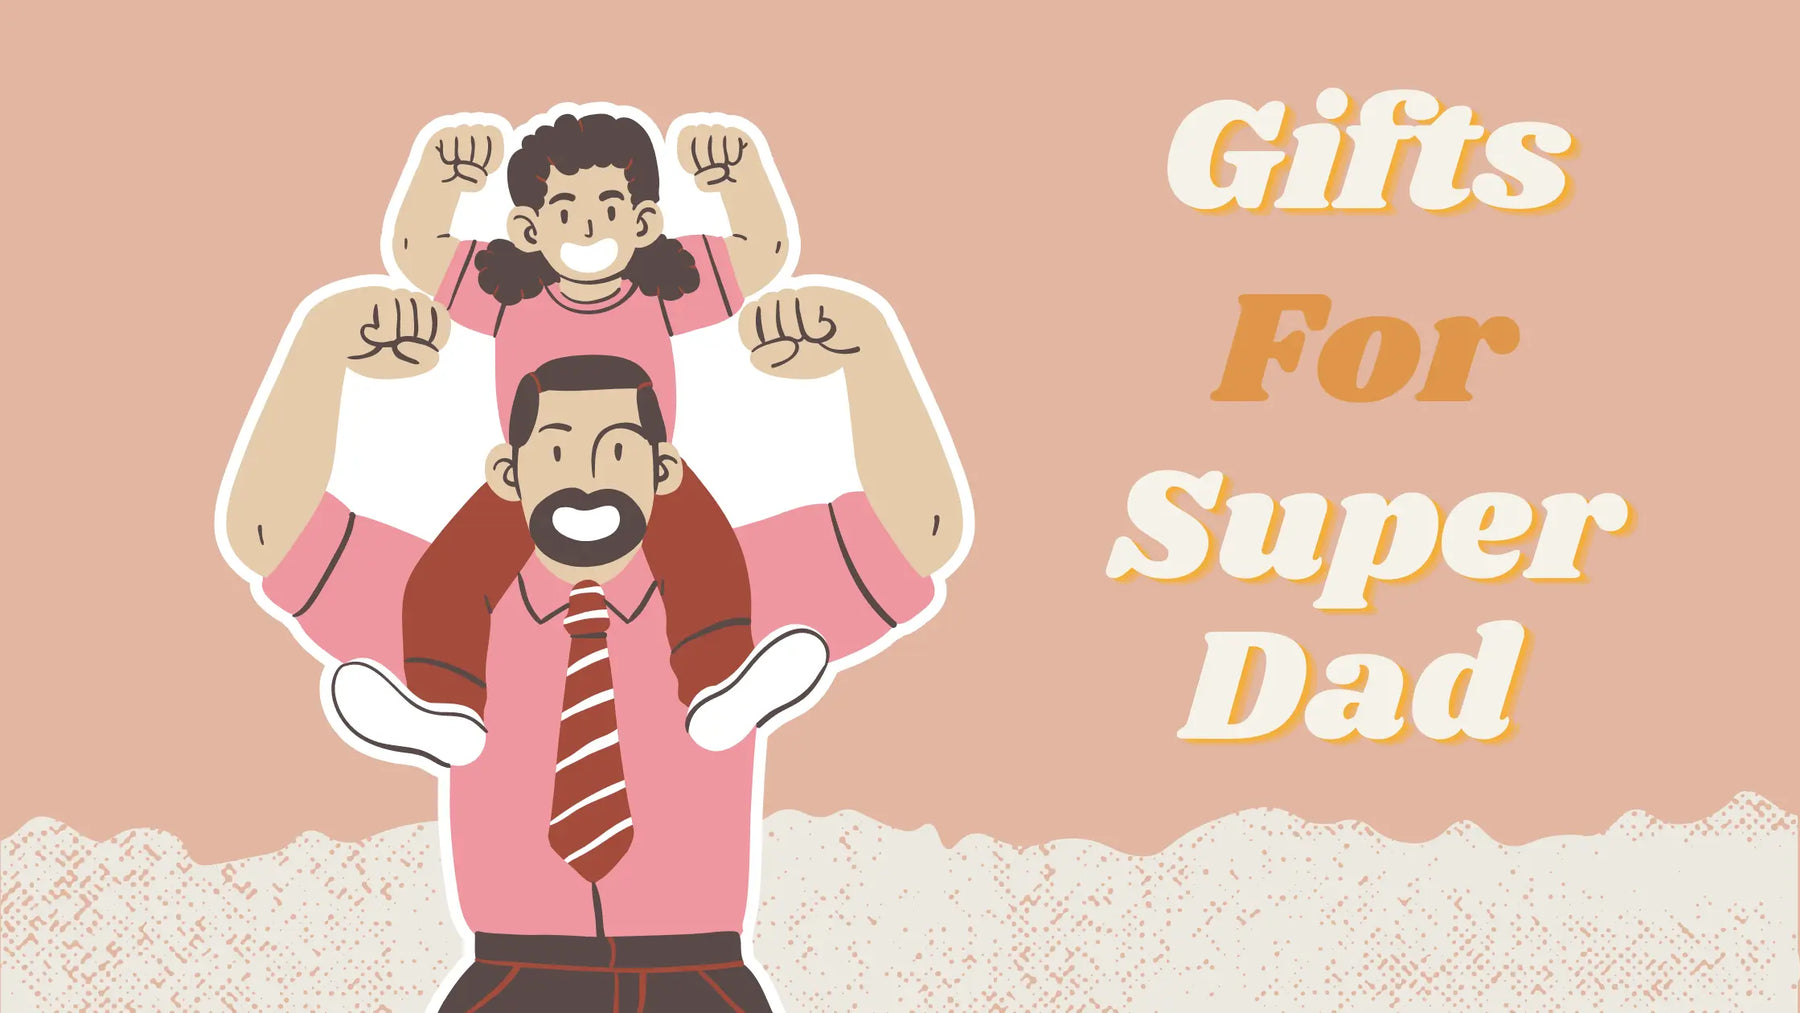 What To Gift Your Dad for Fathers Day Per His Zodiac Sign